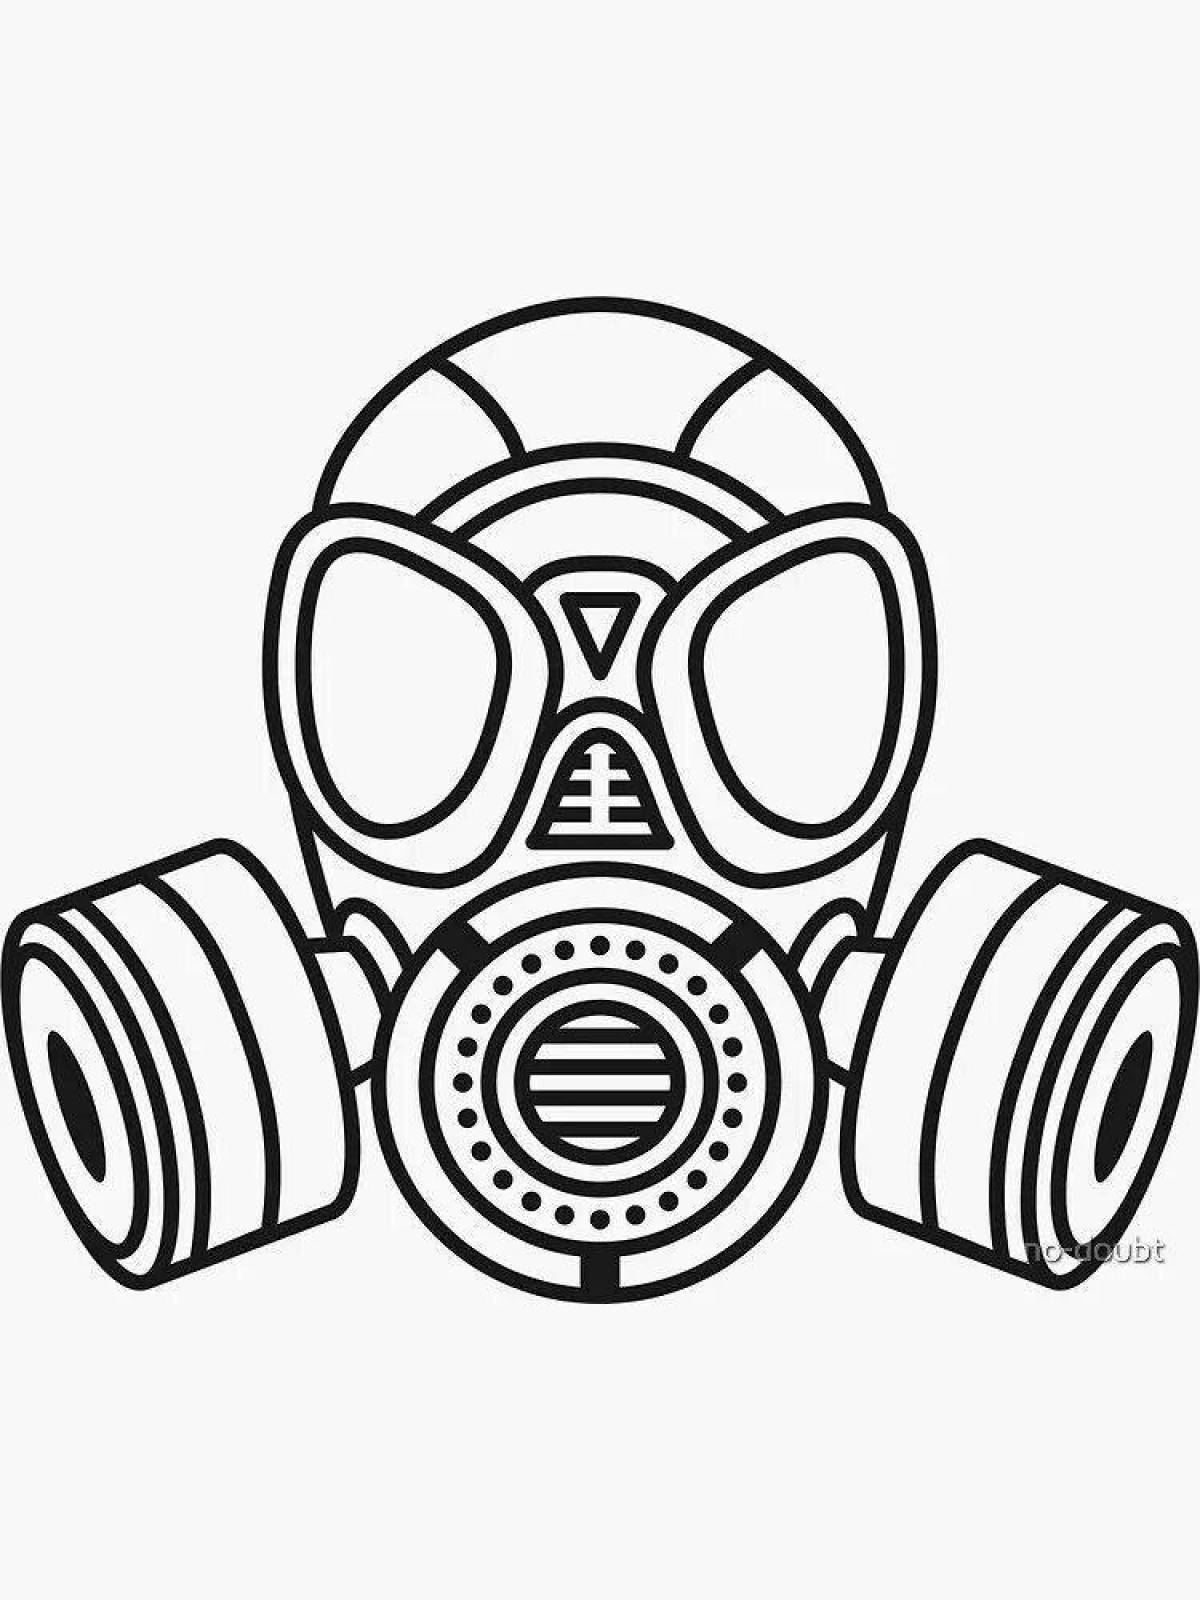 Fearless mask coloring page